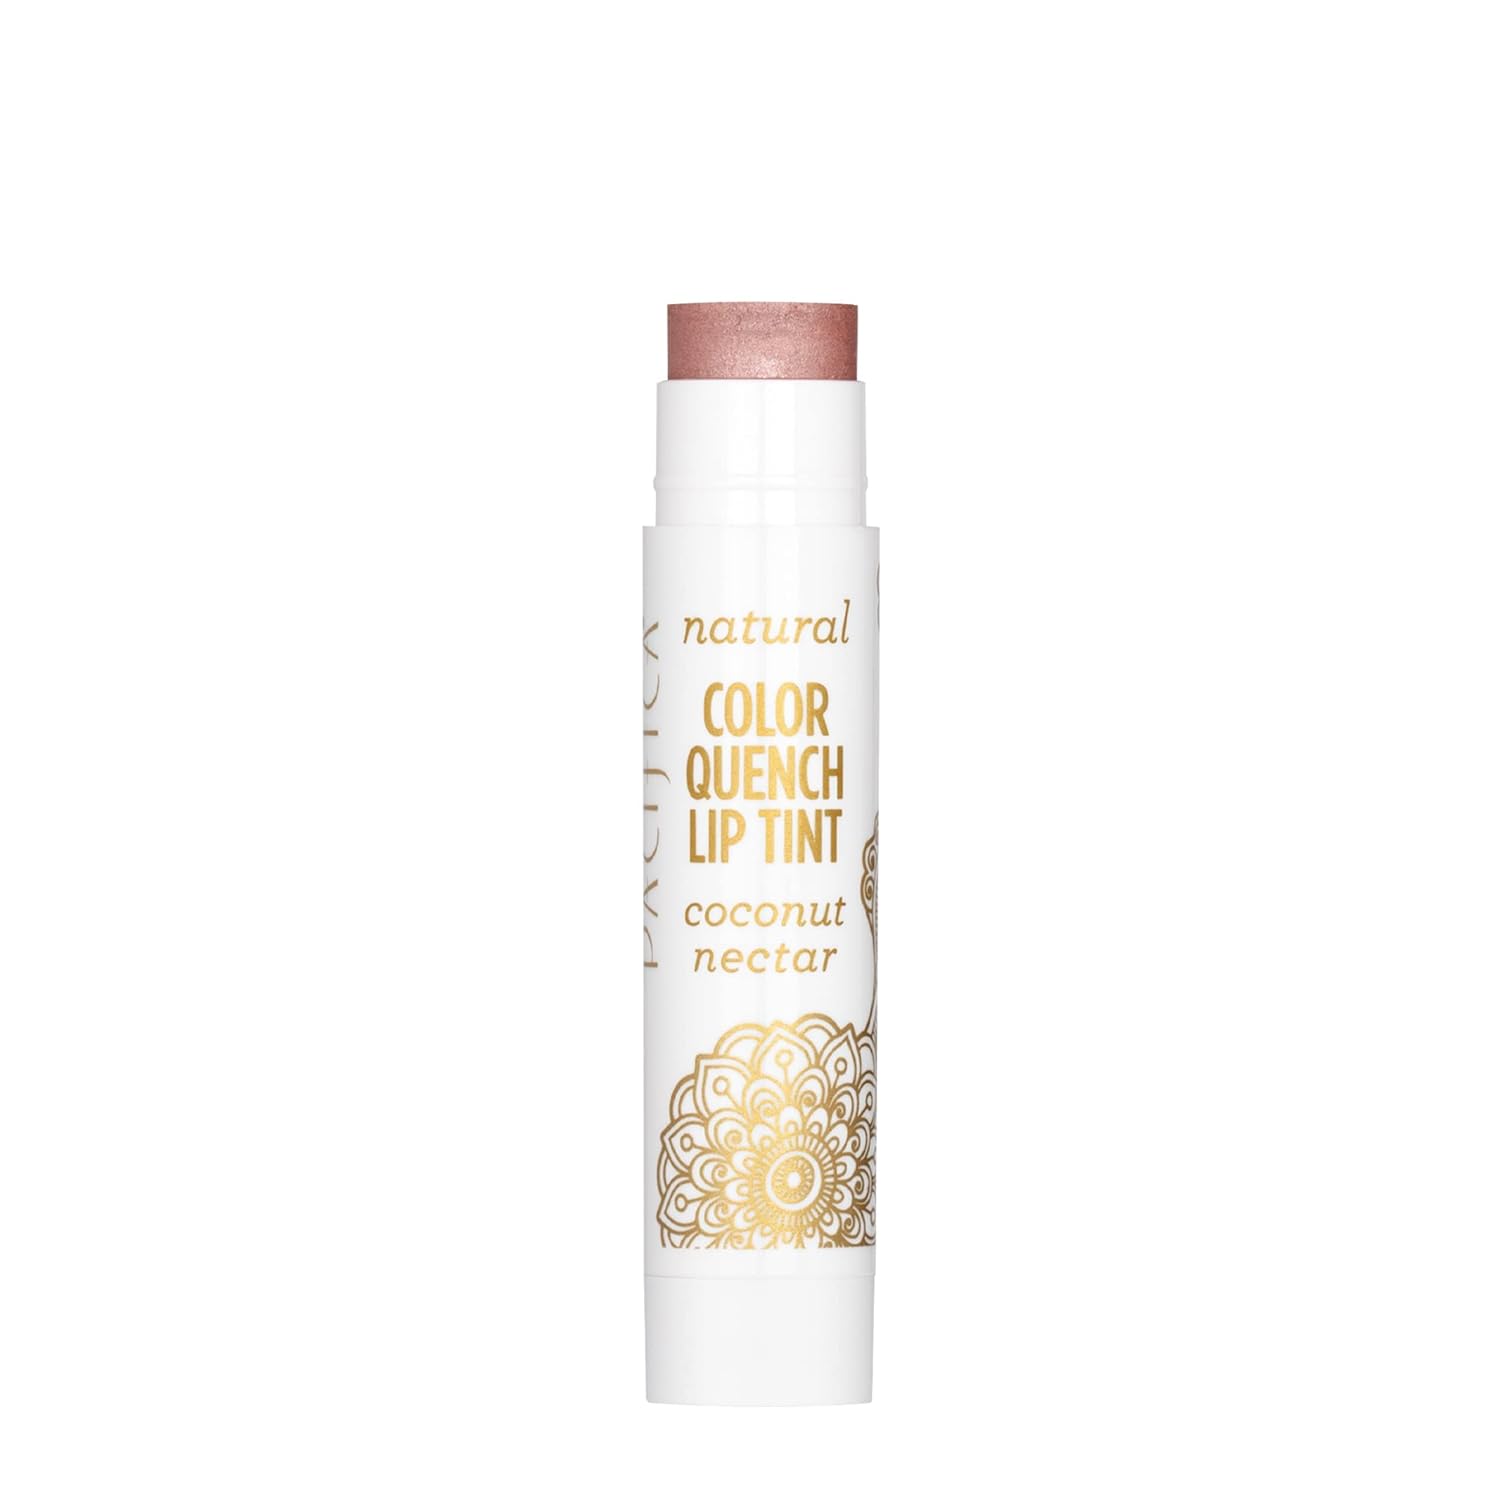 Pacifica Beauty Color Quench Lip Tint - Coconut Nectar, 0.15 Ounce : Lip Glosses : Beauty & Personal Care